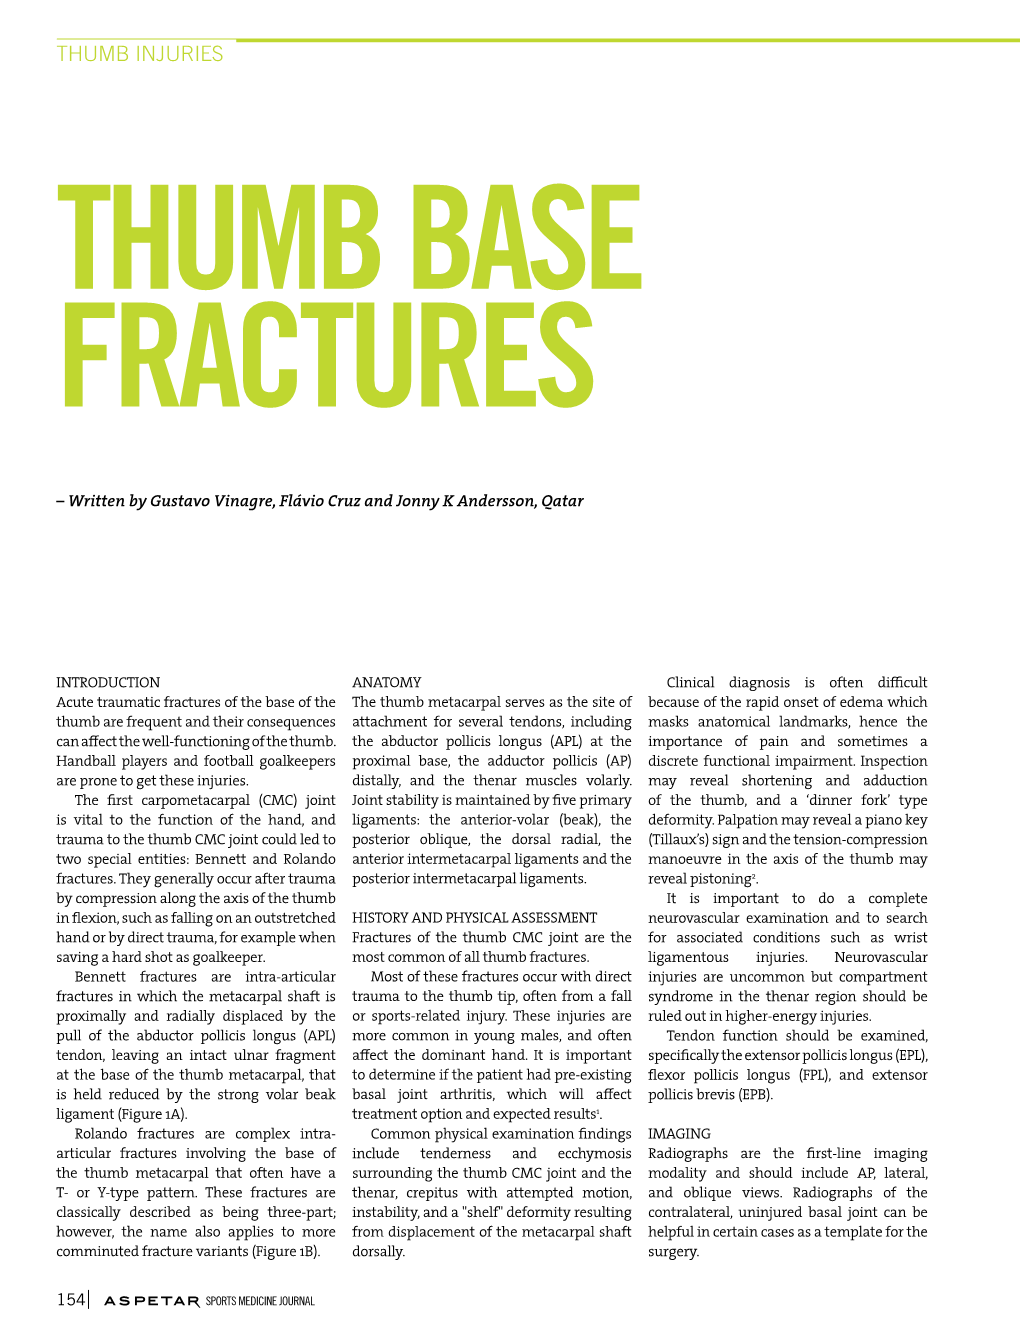 Thumb Injuries Thumb Base Fractures